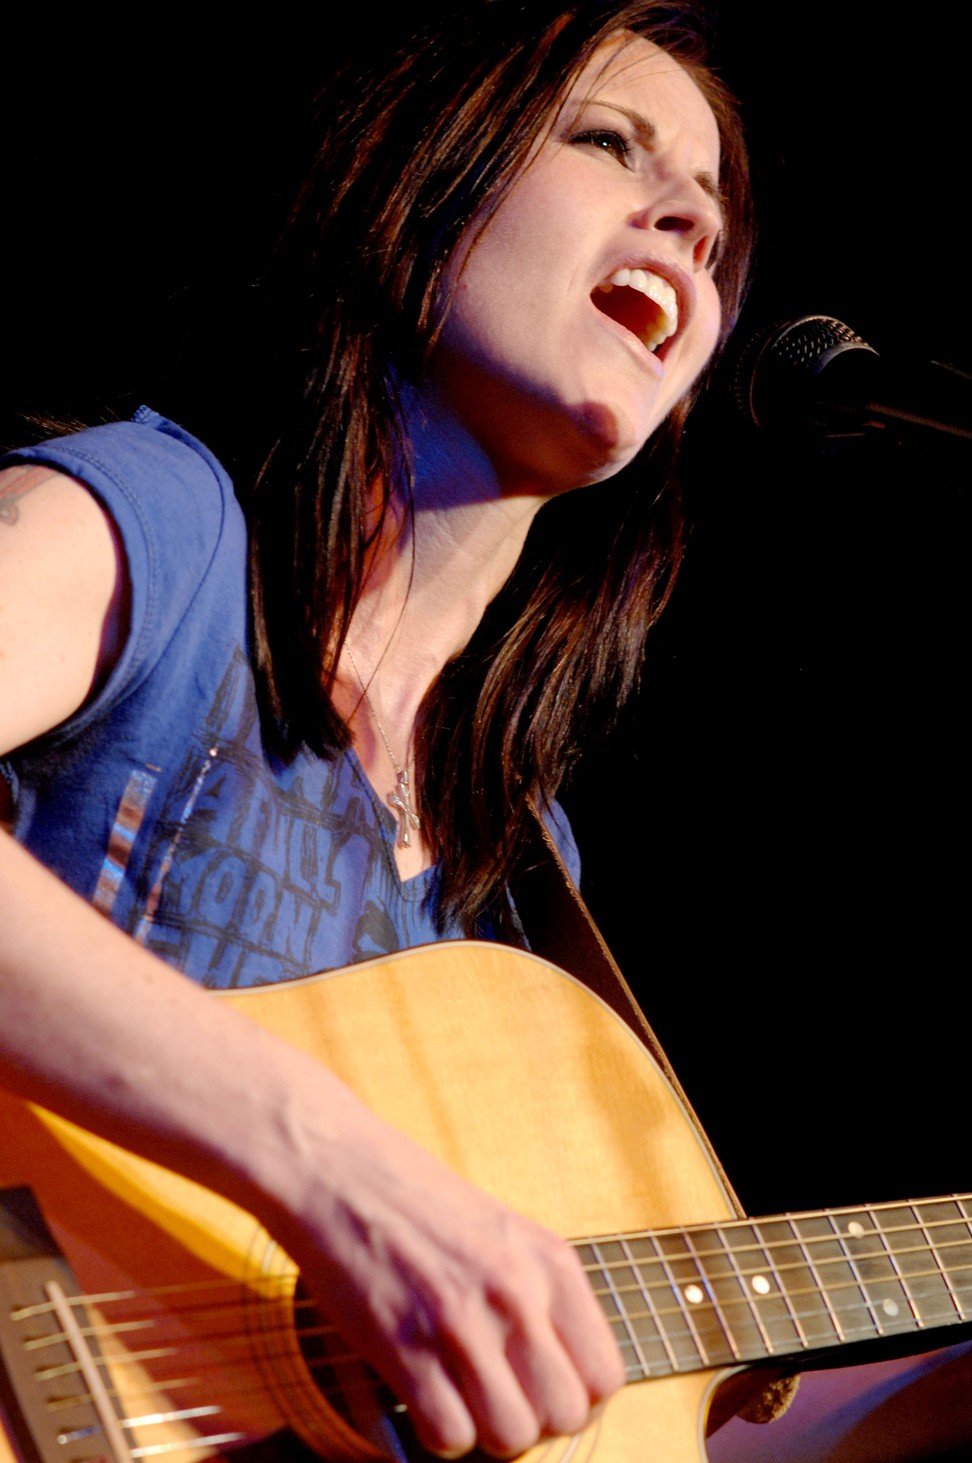 Dolores O'Riordan performs at Grappa’s Cellar in Jardine House, Central, in 2007. Photo: Steve Cray